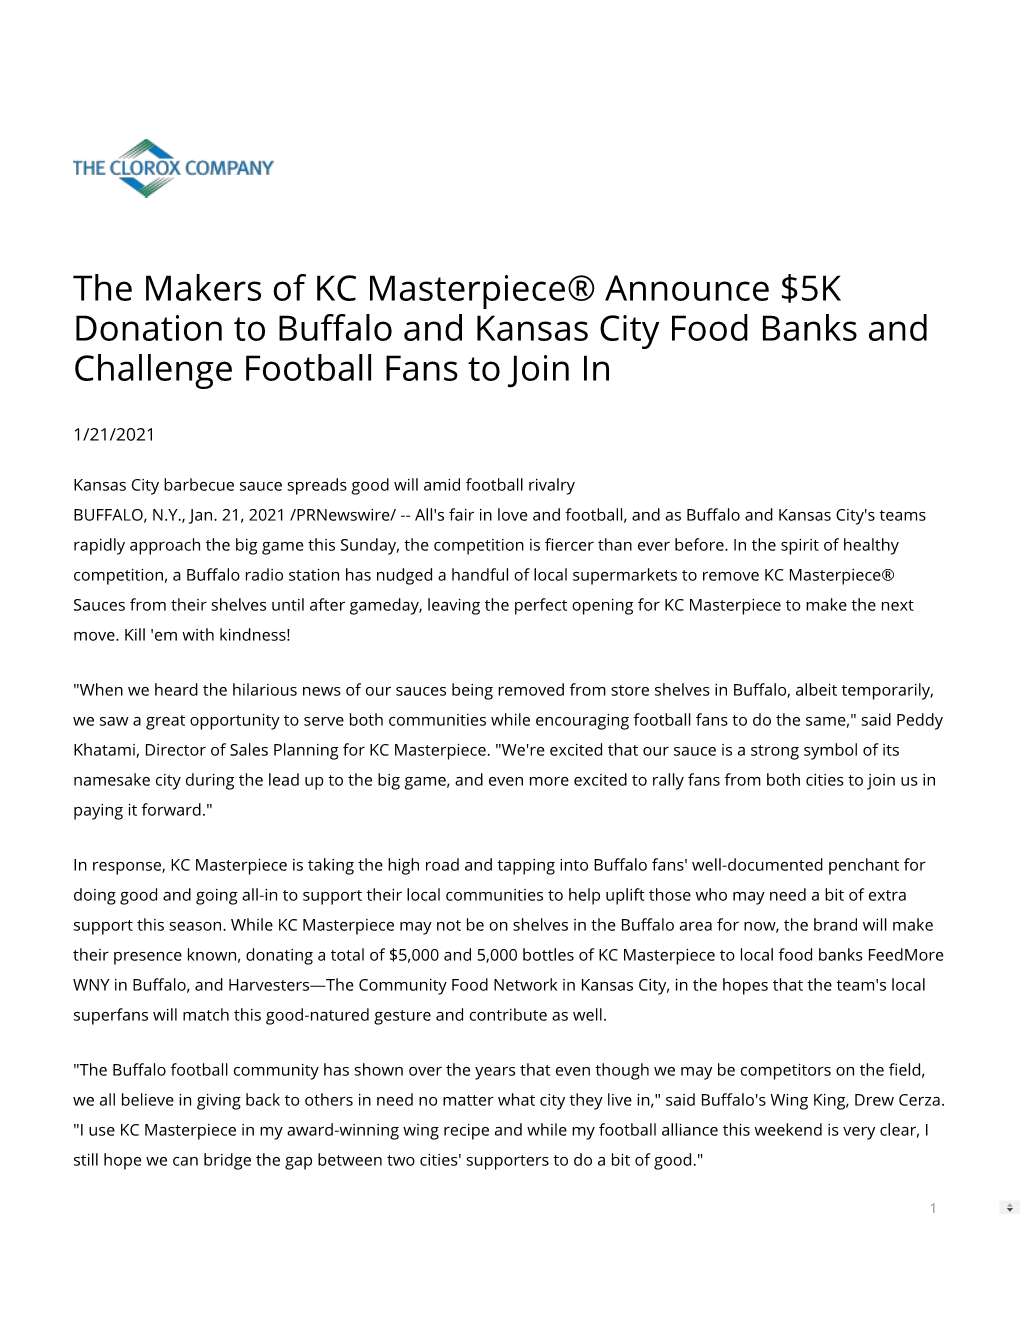 The Makers of KC Masterpiece® Announce $5K Donation to Bu Alo